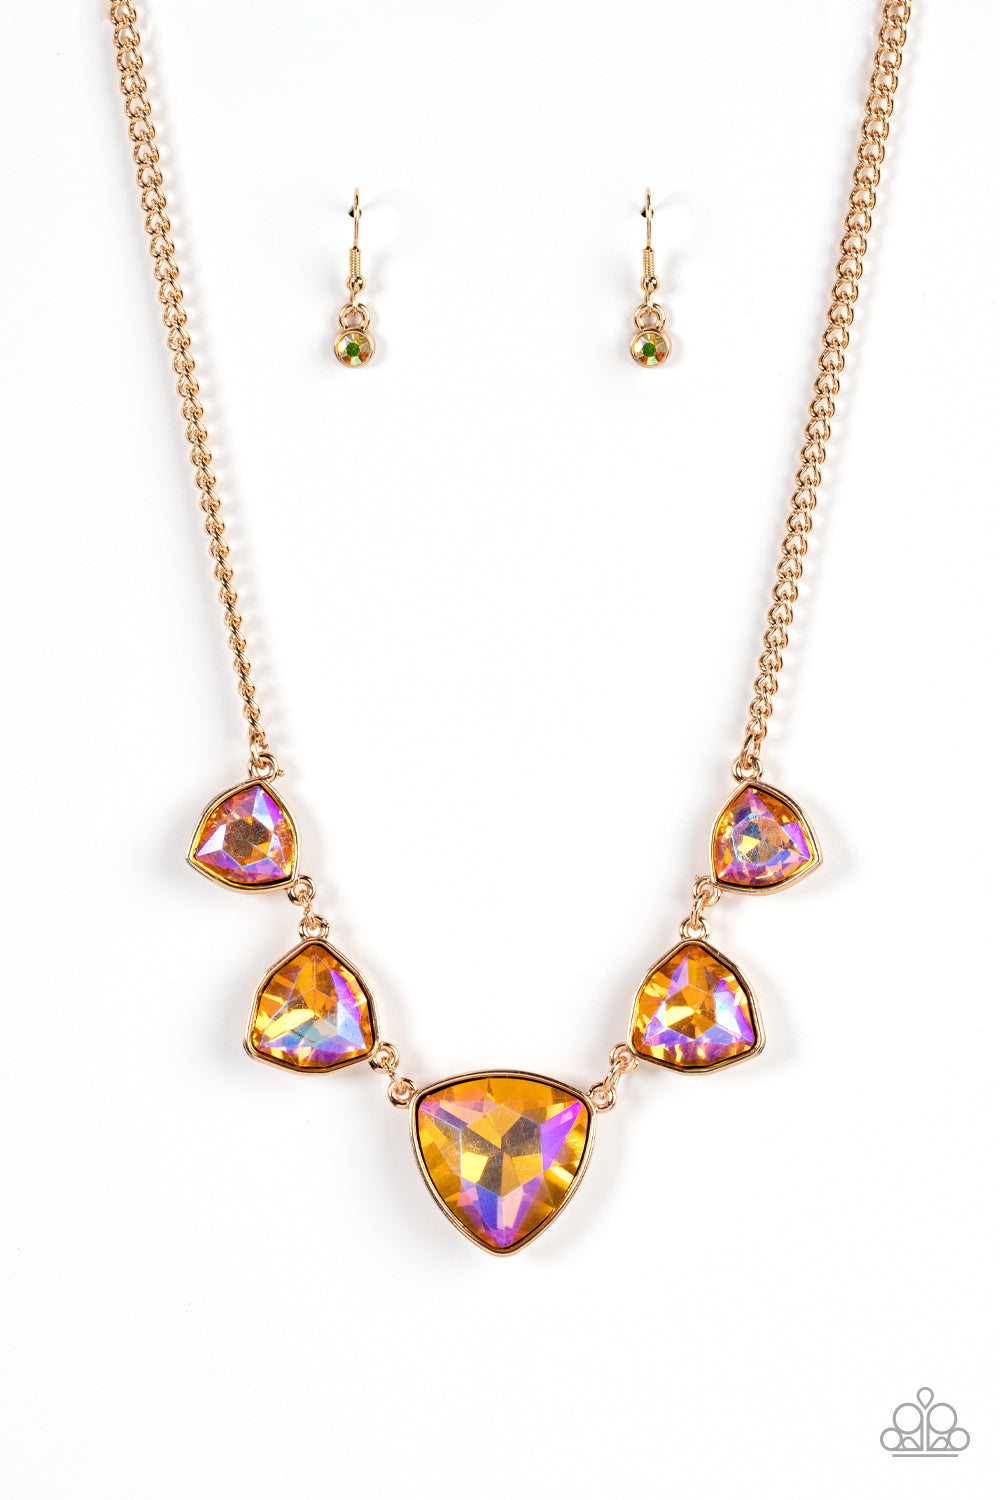 Cosmic Constellations Gold Necklace - Paparazzi Accessories  Encased in sleek gold fittings, an oversized collection of UV geometric gems gradually increase in size as they link below the collar for a golden statement. Features an adjustable clasp closure.  Sold as one individual necklace. Includes one pair of matching earrings.